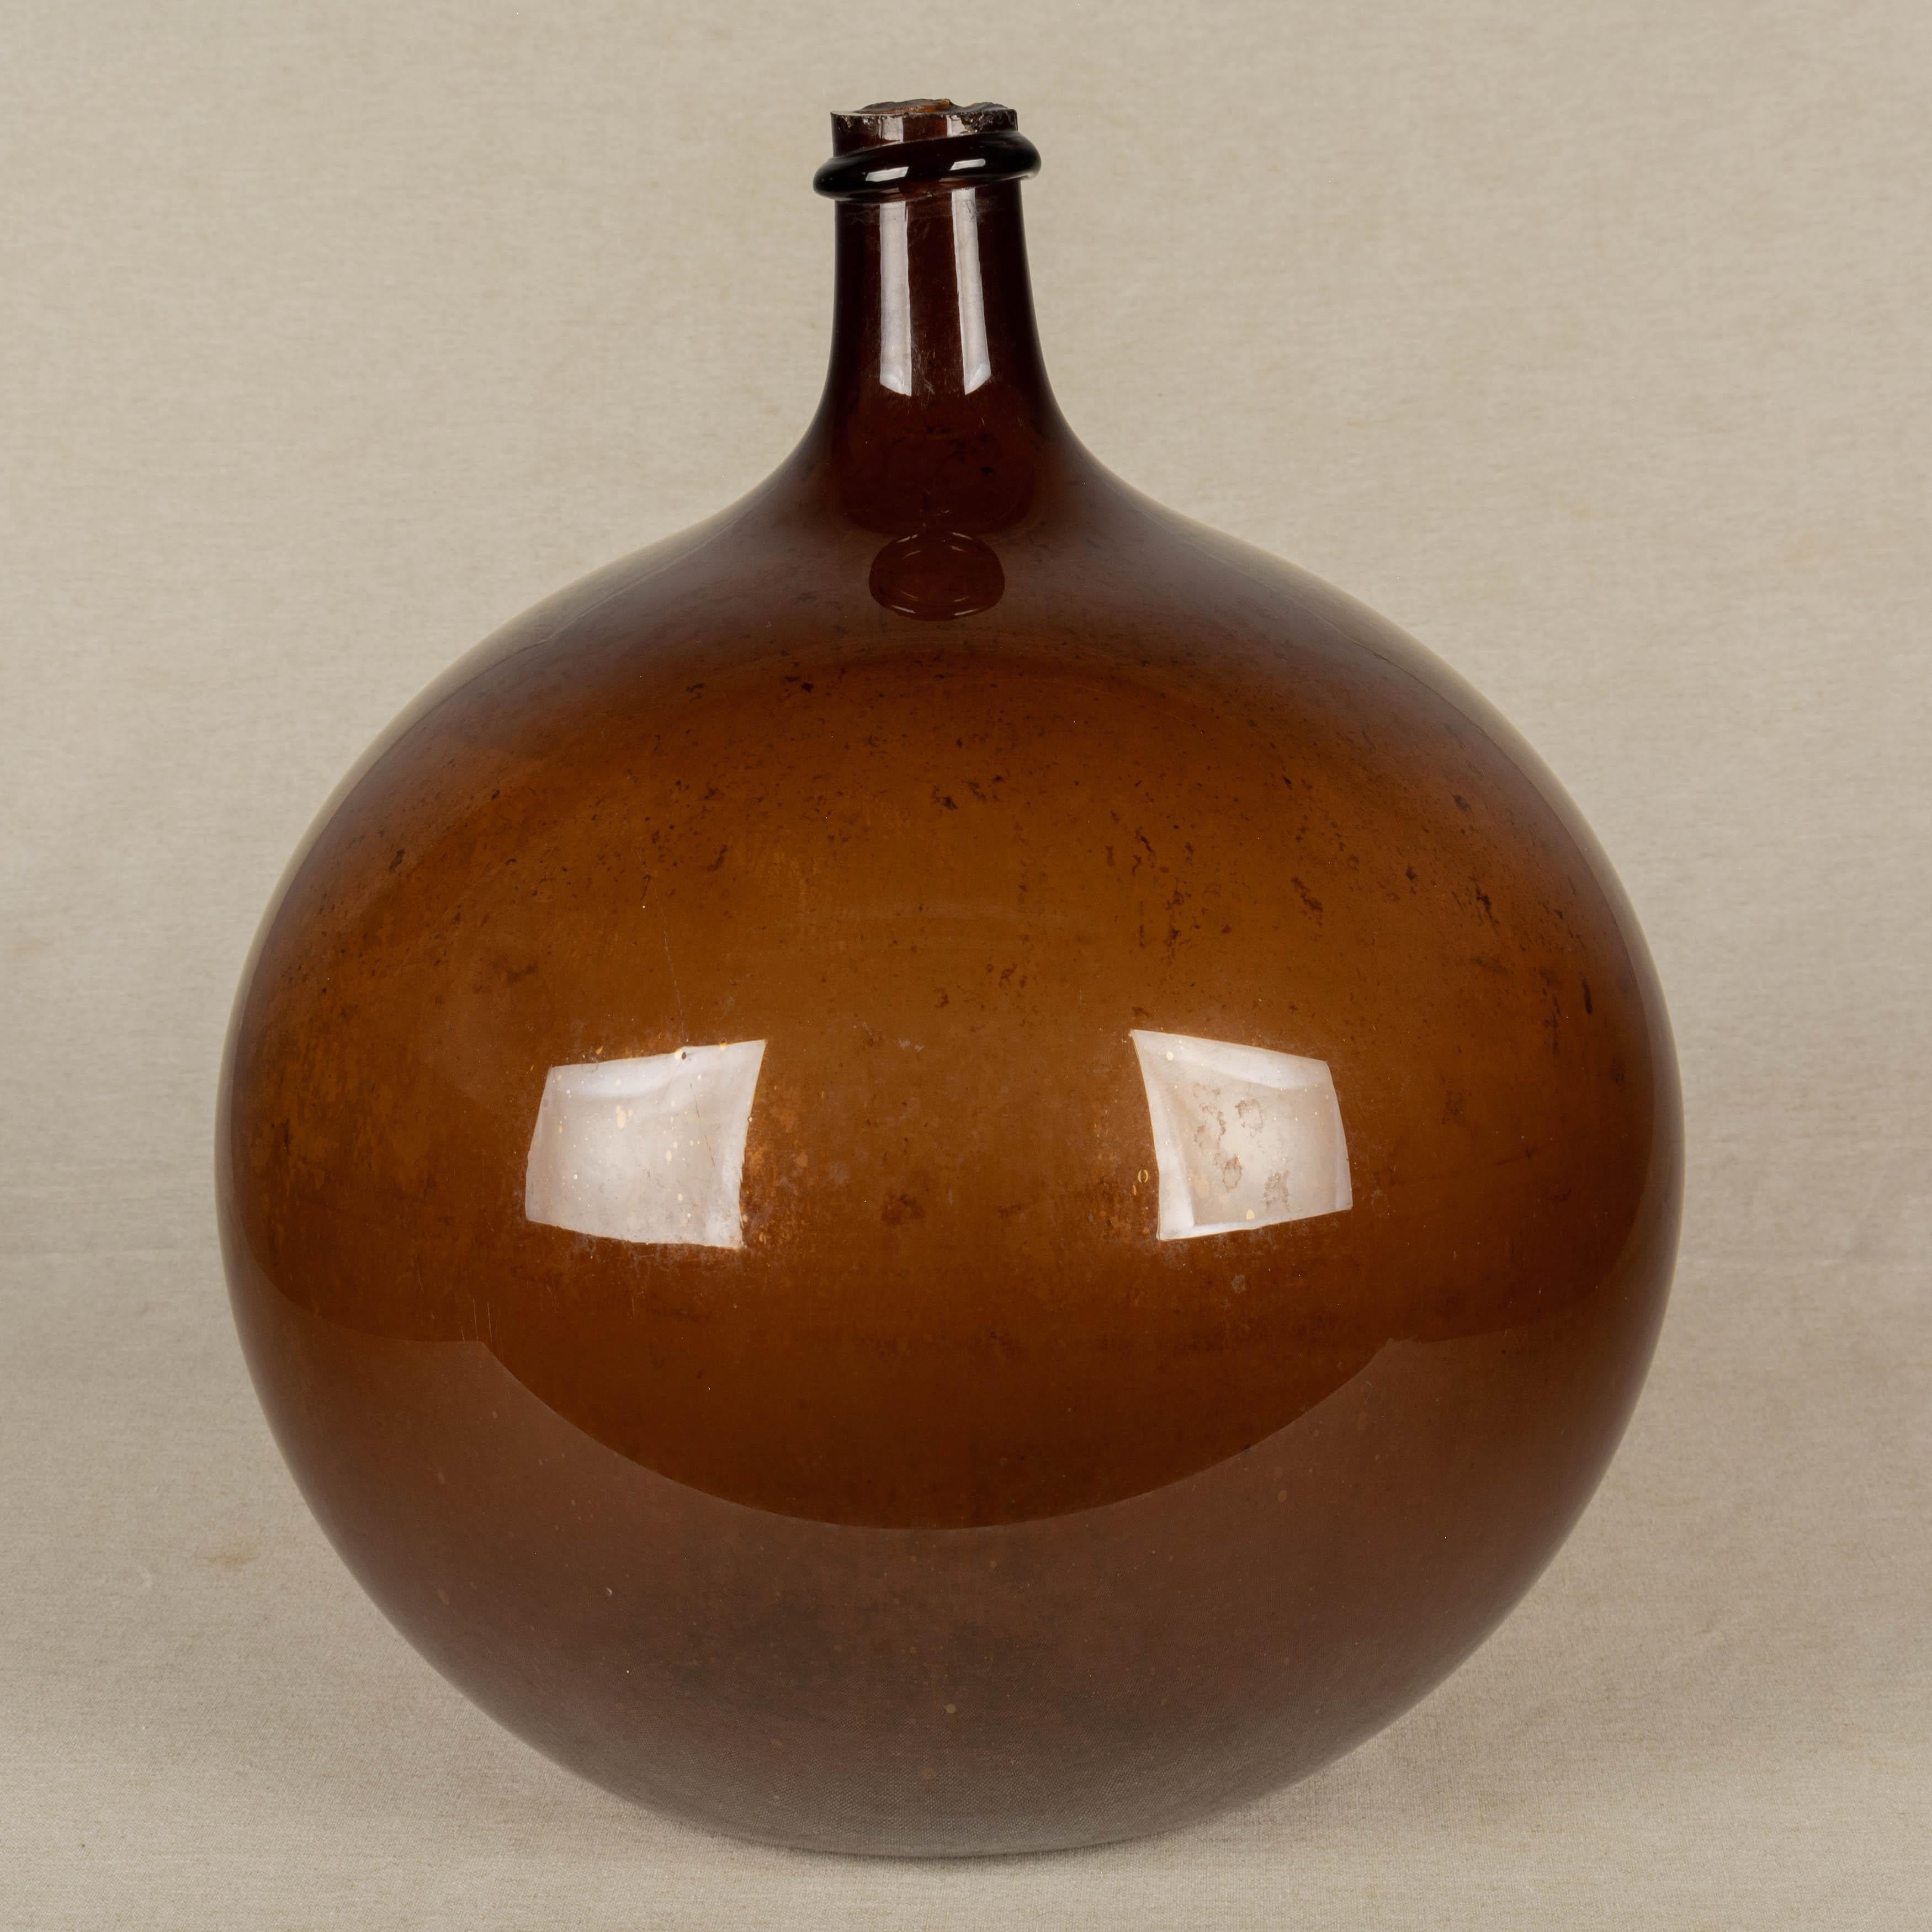 Hand-Crafted 19th Century French Blown Glass Demijohn Bottle